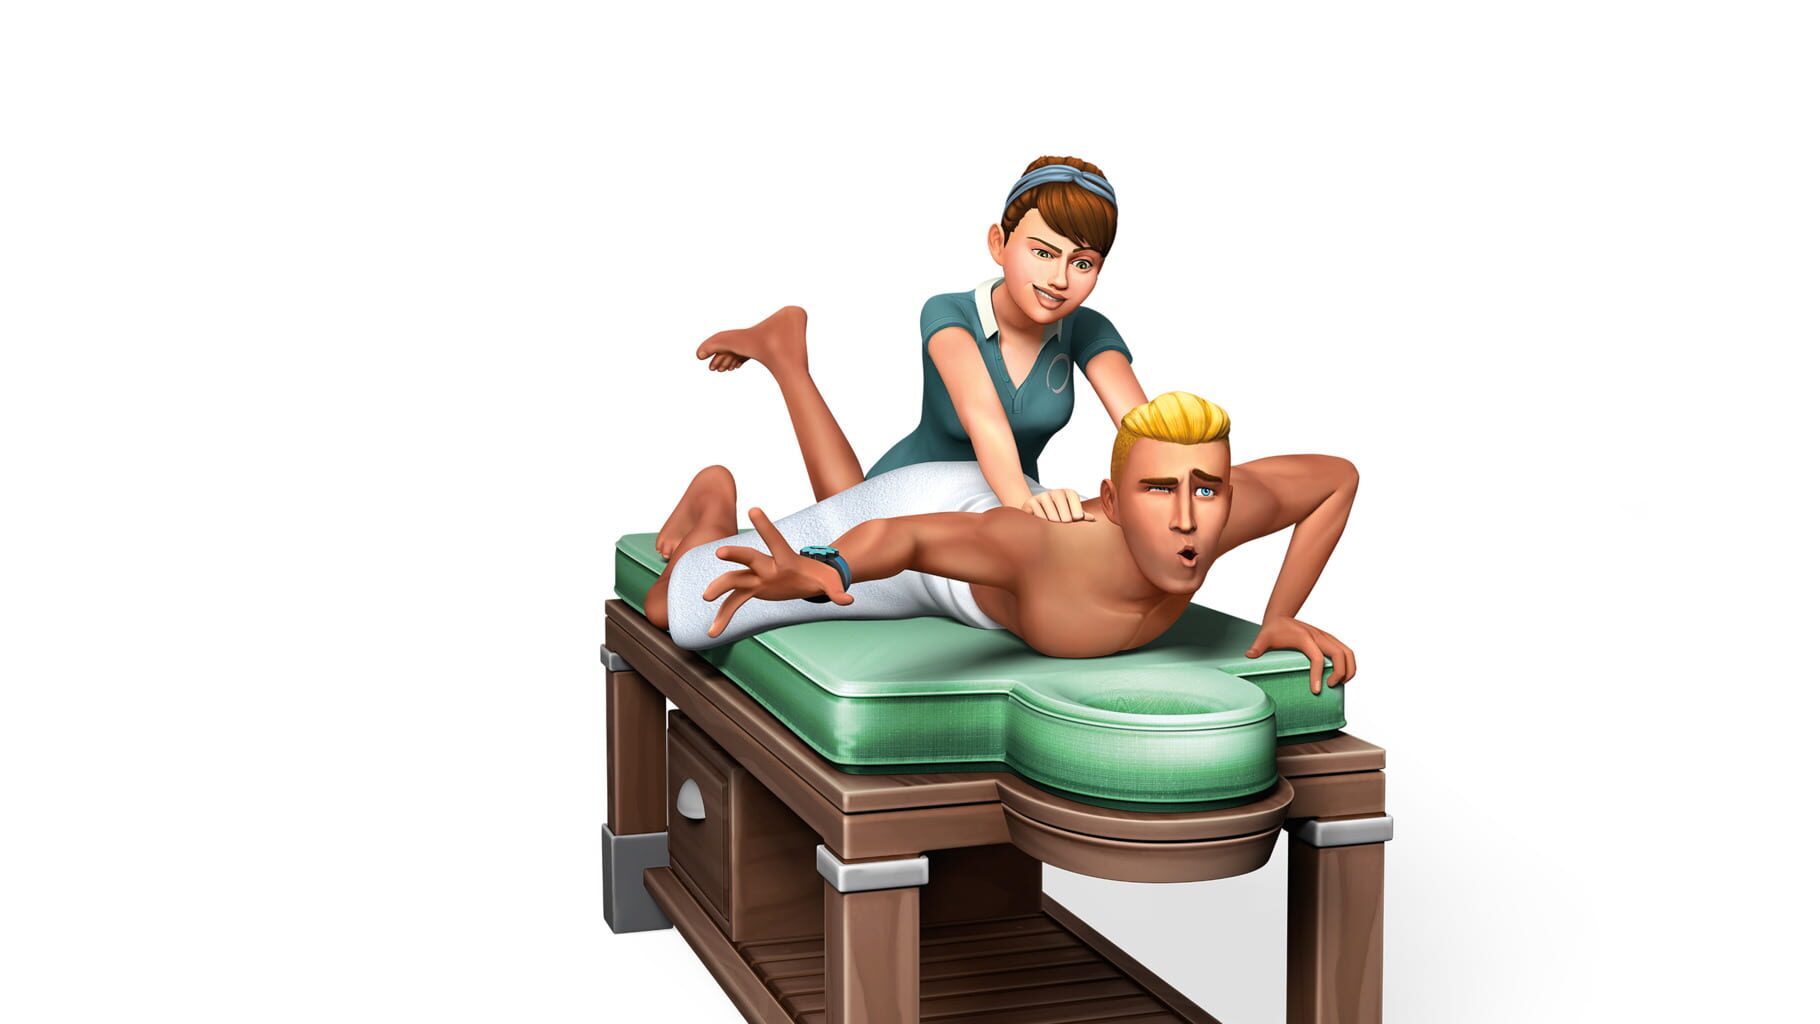 Arte - The Sims 4: Spa Day